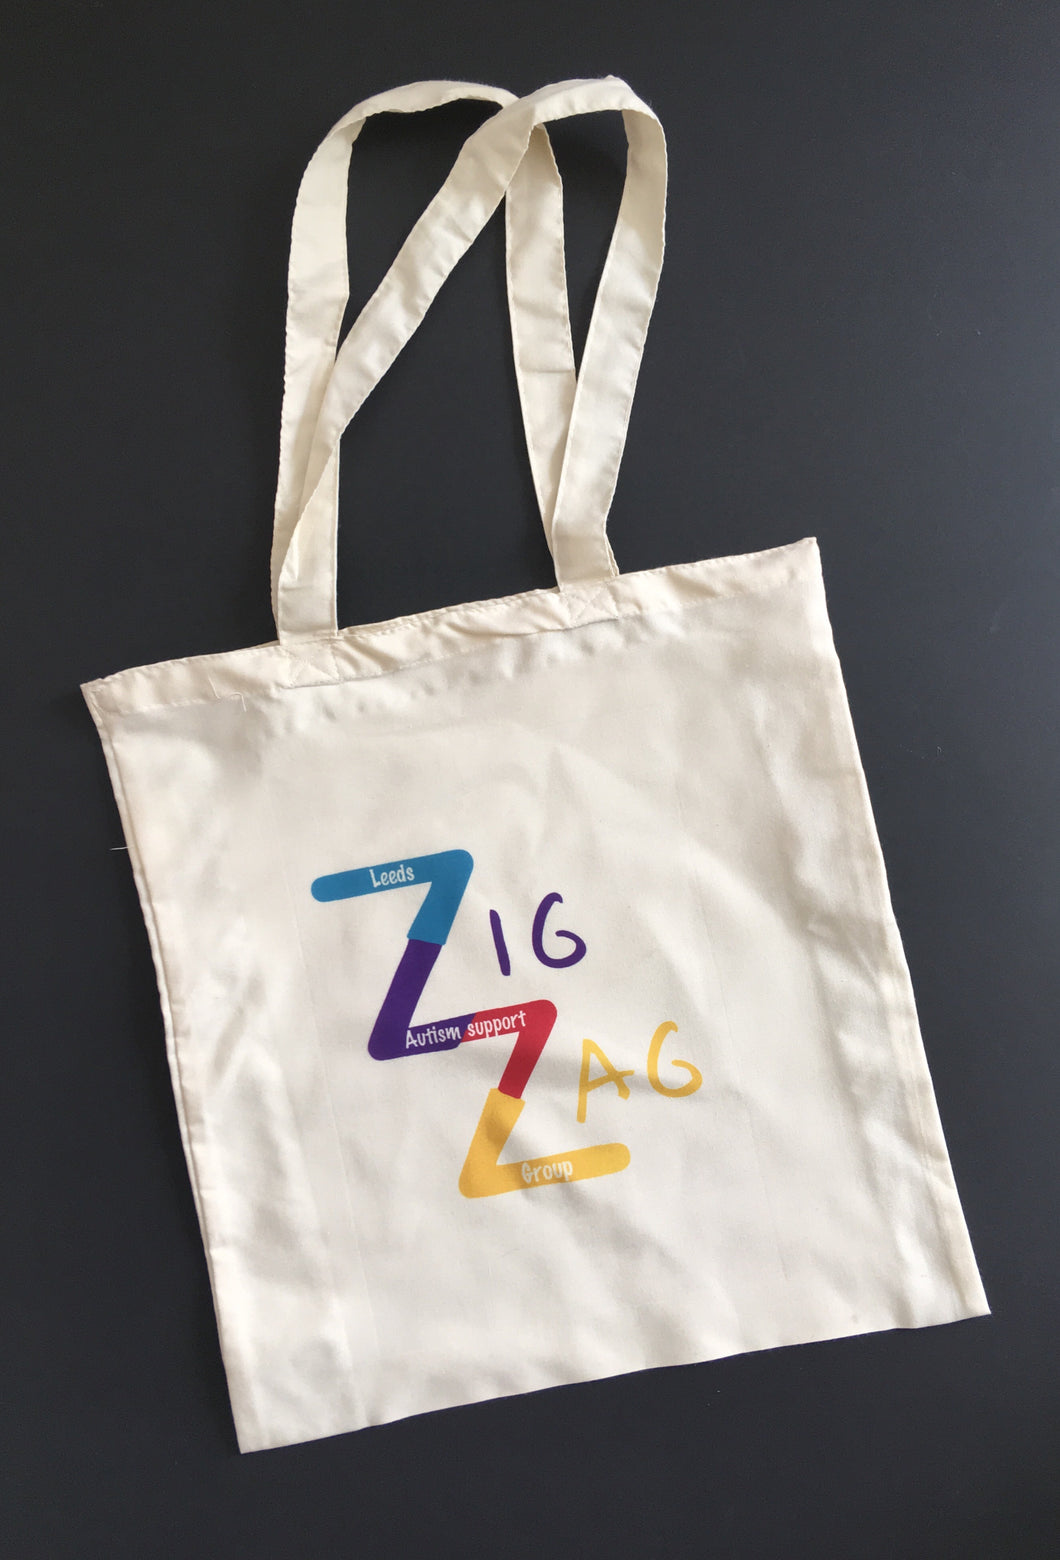 Zig Zag Autism Support Group Tote shopping bag - Fred And Bo